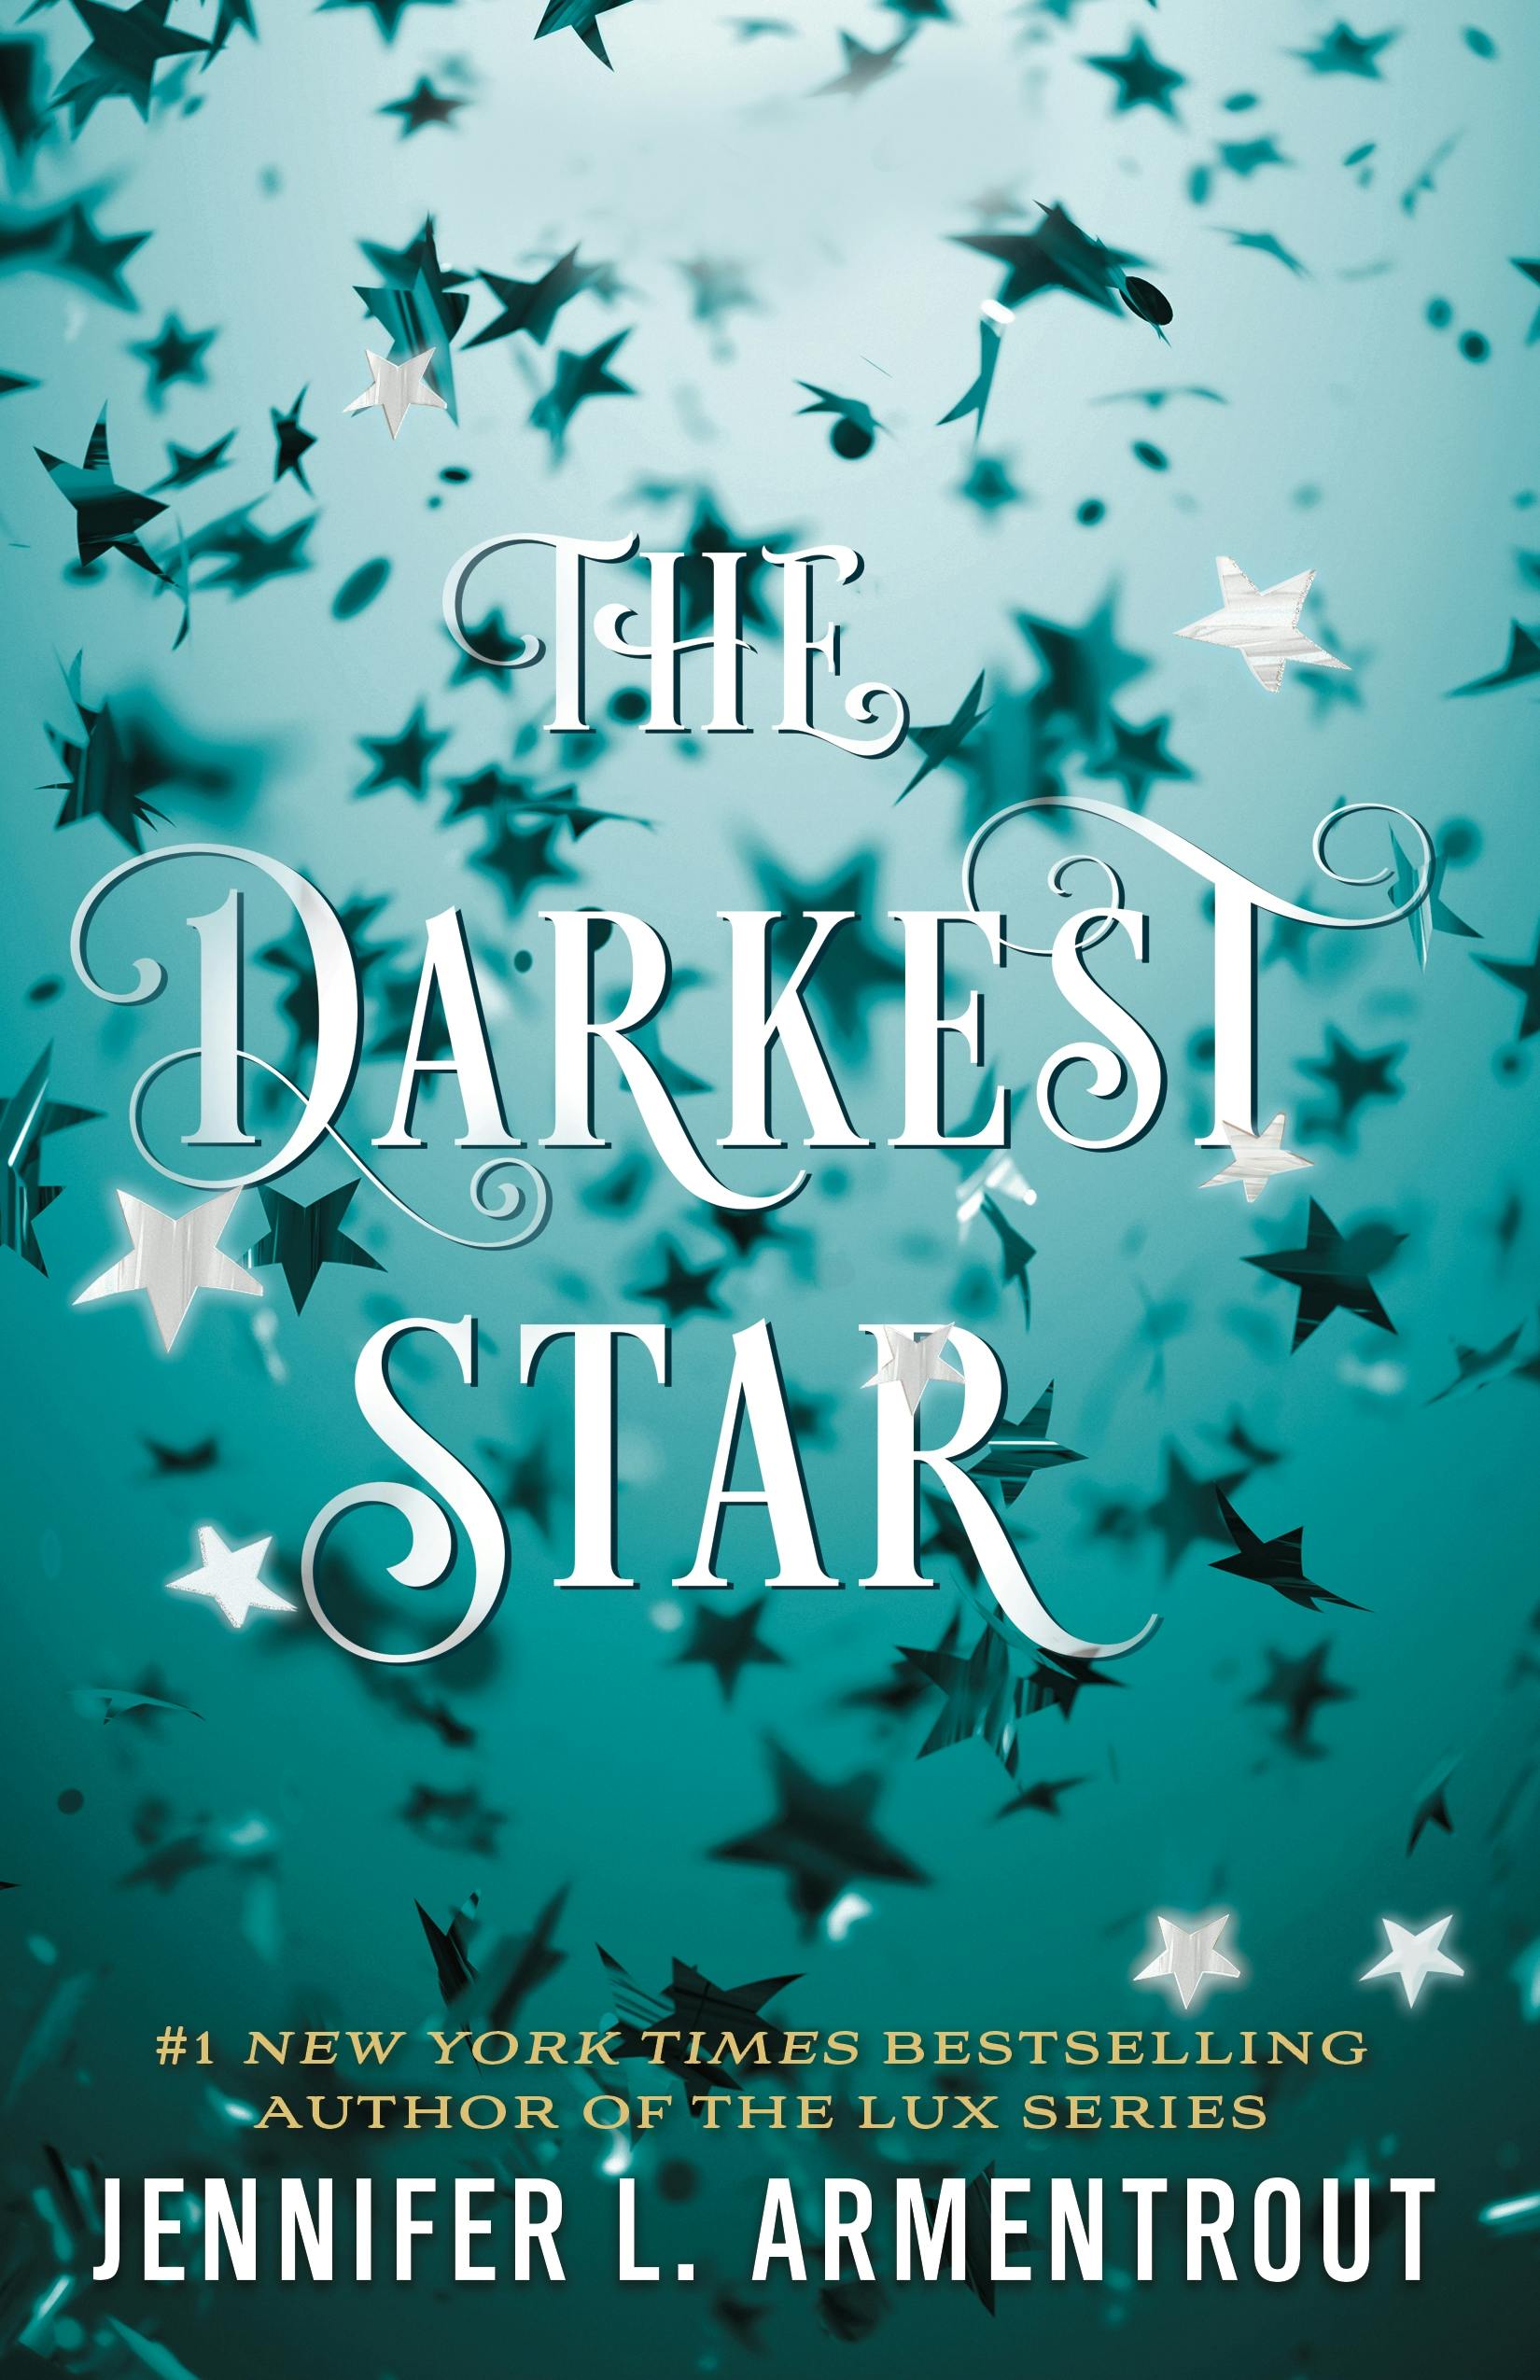 Cover for the book titled as: The Darkest Star